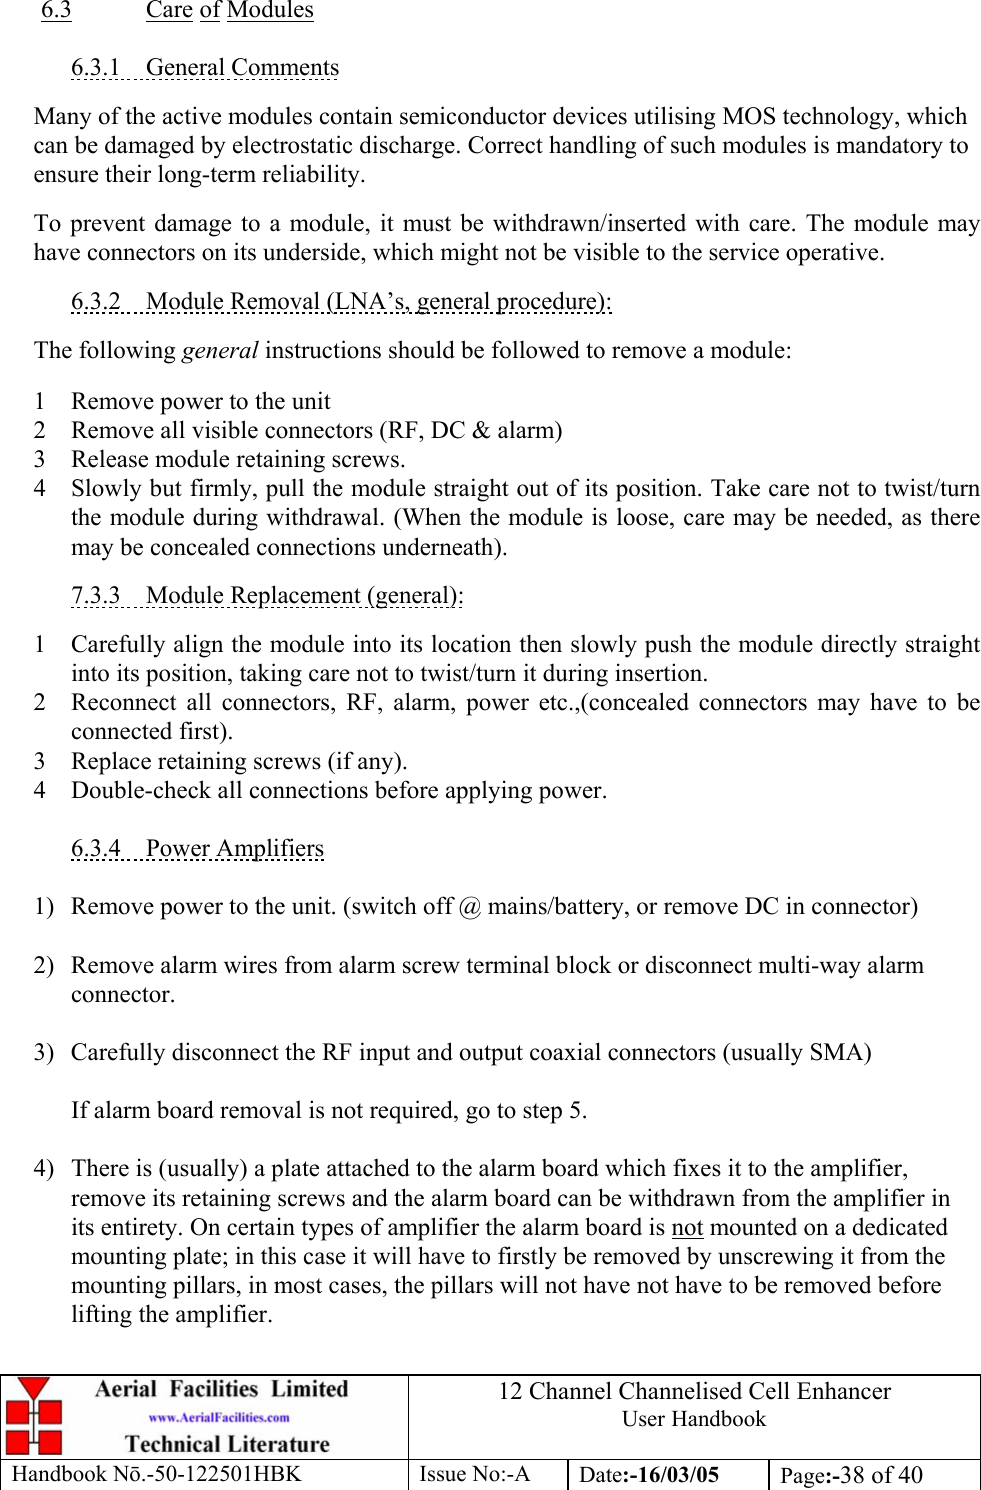 12 Channel Channelised Cell Enhancer User Handbook Handbook N.-50-122501HBK Issue No:-A Date:-16/03/05  Page:-38 of 40   6.3 Care of Modules  6.3.1 General Comments  Many of the active modules contain semiconductor devices utilising MOS technology, which can be damaged by electrostatic discharge. Correct handling of such modules is mandatory to ensure their long-term reliability.  To prevent damage to a module, it must be withdrawn/inserted with care. The module may have connectors on its underside, which might not be visible to the service operative.  6.3.2  Module Removal (LNA’s, general procedure):  The following general instructions should be followed to remove a module:  1  Remove power to the unit 2  Remove all visible connectors (RF, DC &amp; alarm) 3  Release module retaining screws. 4  Slowly but firmly, pull the module straight out of its position. Take care not to twist/turn the module during withdrawal. (When the module is loose, care may be needed, as there may be concealed connections underneath).  7.3.3  Module Replacement (general):  1  Carefully align the module into its location then slowly push the module directly straight into its position, taking care not to twist/turn it during insertion. 2  Reconnect all connectors, RF, alarm, power etc.,(concealed connectors may have to be connected first). 3  Replace retaining screws (if any). 4  Double-check all connections before applying power.  6.3.4 Power Amplifiers  1)  Remove power to the unit. (switch off @ mains/battery, or remove DC in connector)  2)  Remove alarm wires from alarm screw terminal block or disconnect multi-way alarm connector.  3)  Carefully disconnect the RF input and output coaxial connectors (usually SMA)  If alarm board removal is not required, go to step 5.  4)  There is (usually) a plate attached to the alarm board which fixes it to the amplifier, remove its retaining screws and the alarm board can be withdrawn from the amplifier in its entirety. On certain types of amplifier the alarm board is not mounted on a dedicated mounting plate; in this case it will have to firstly be removed by unscrewing it from the mounting pillars, in most cases, the pillars will not have not have to be removed before lifting the amplifier.  